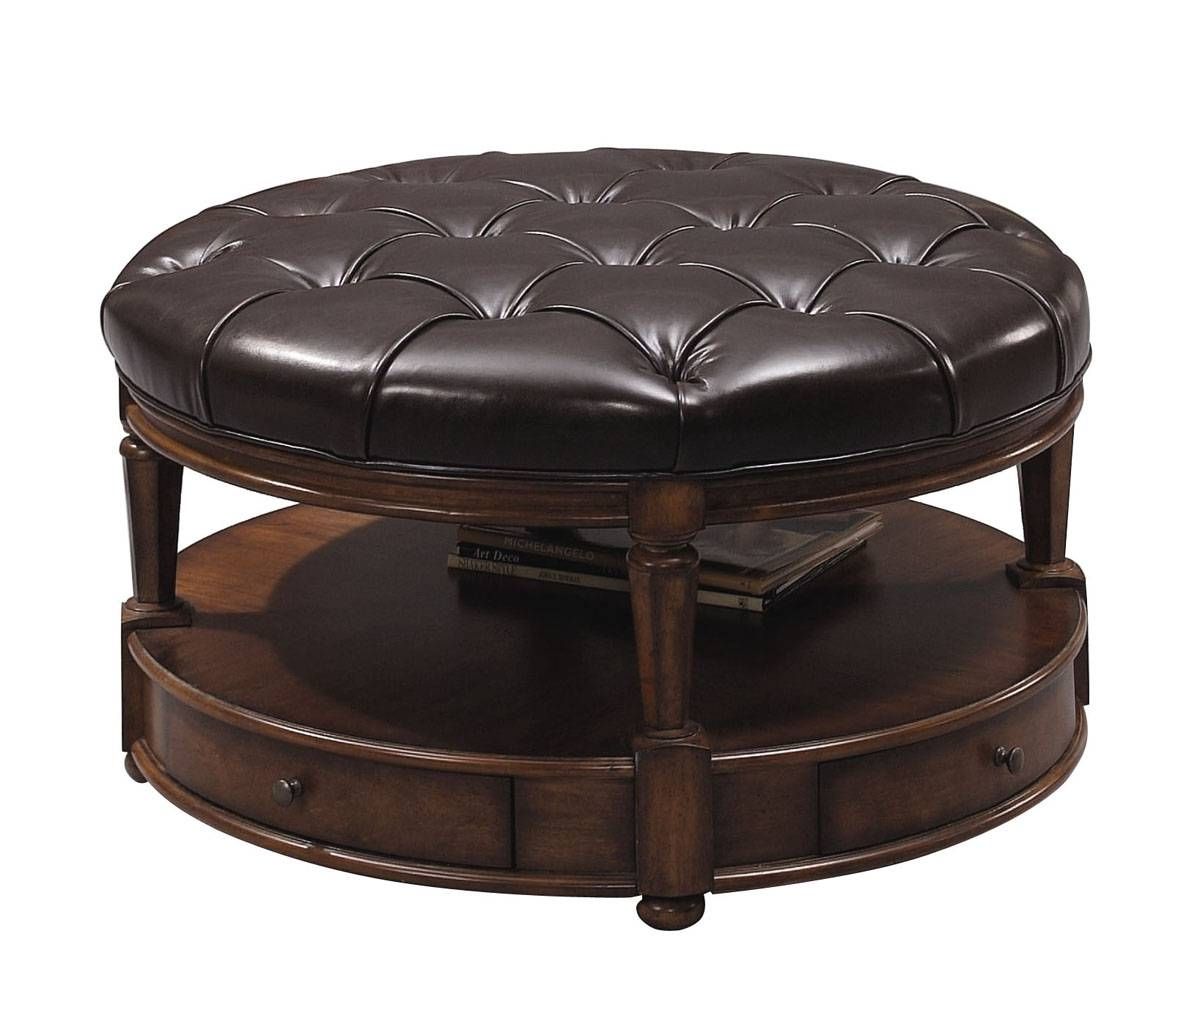 Oversized Leather Ottoman Coffee Table With Oversized Round Coffee Tables (View 19 of 30)